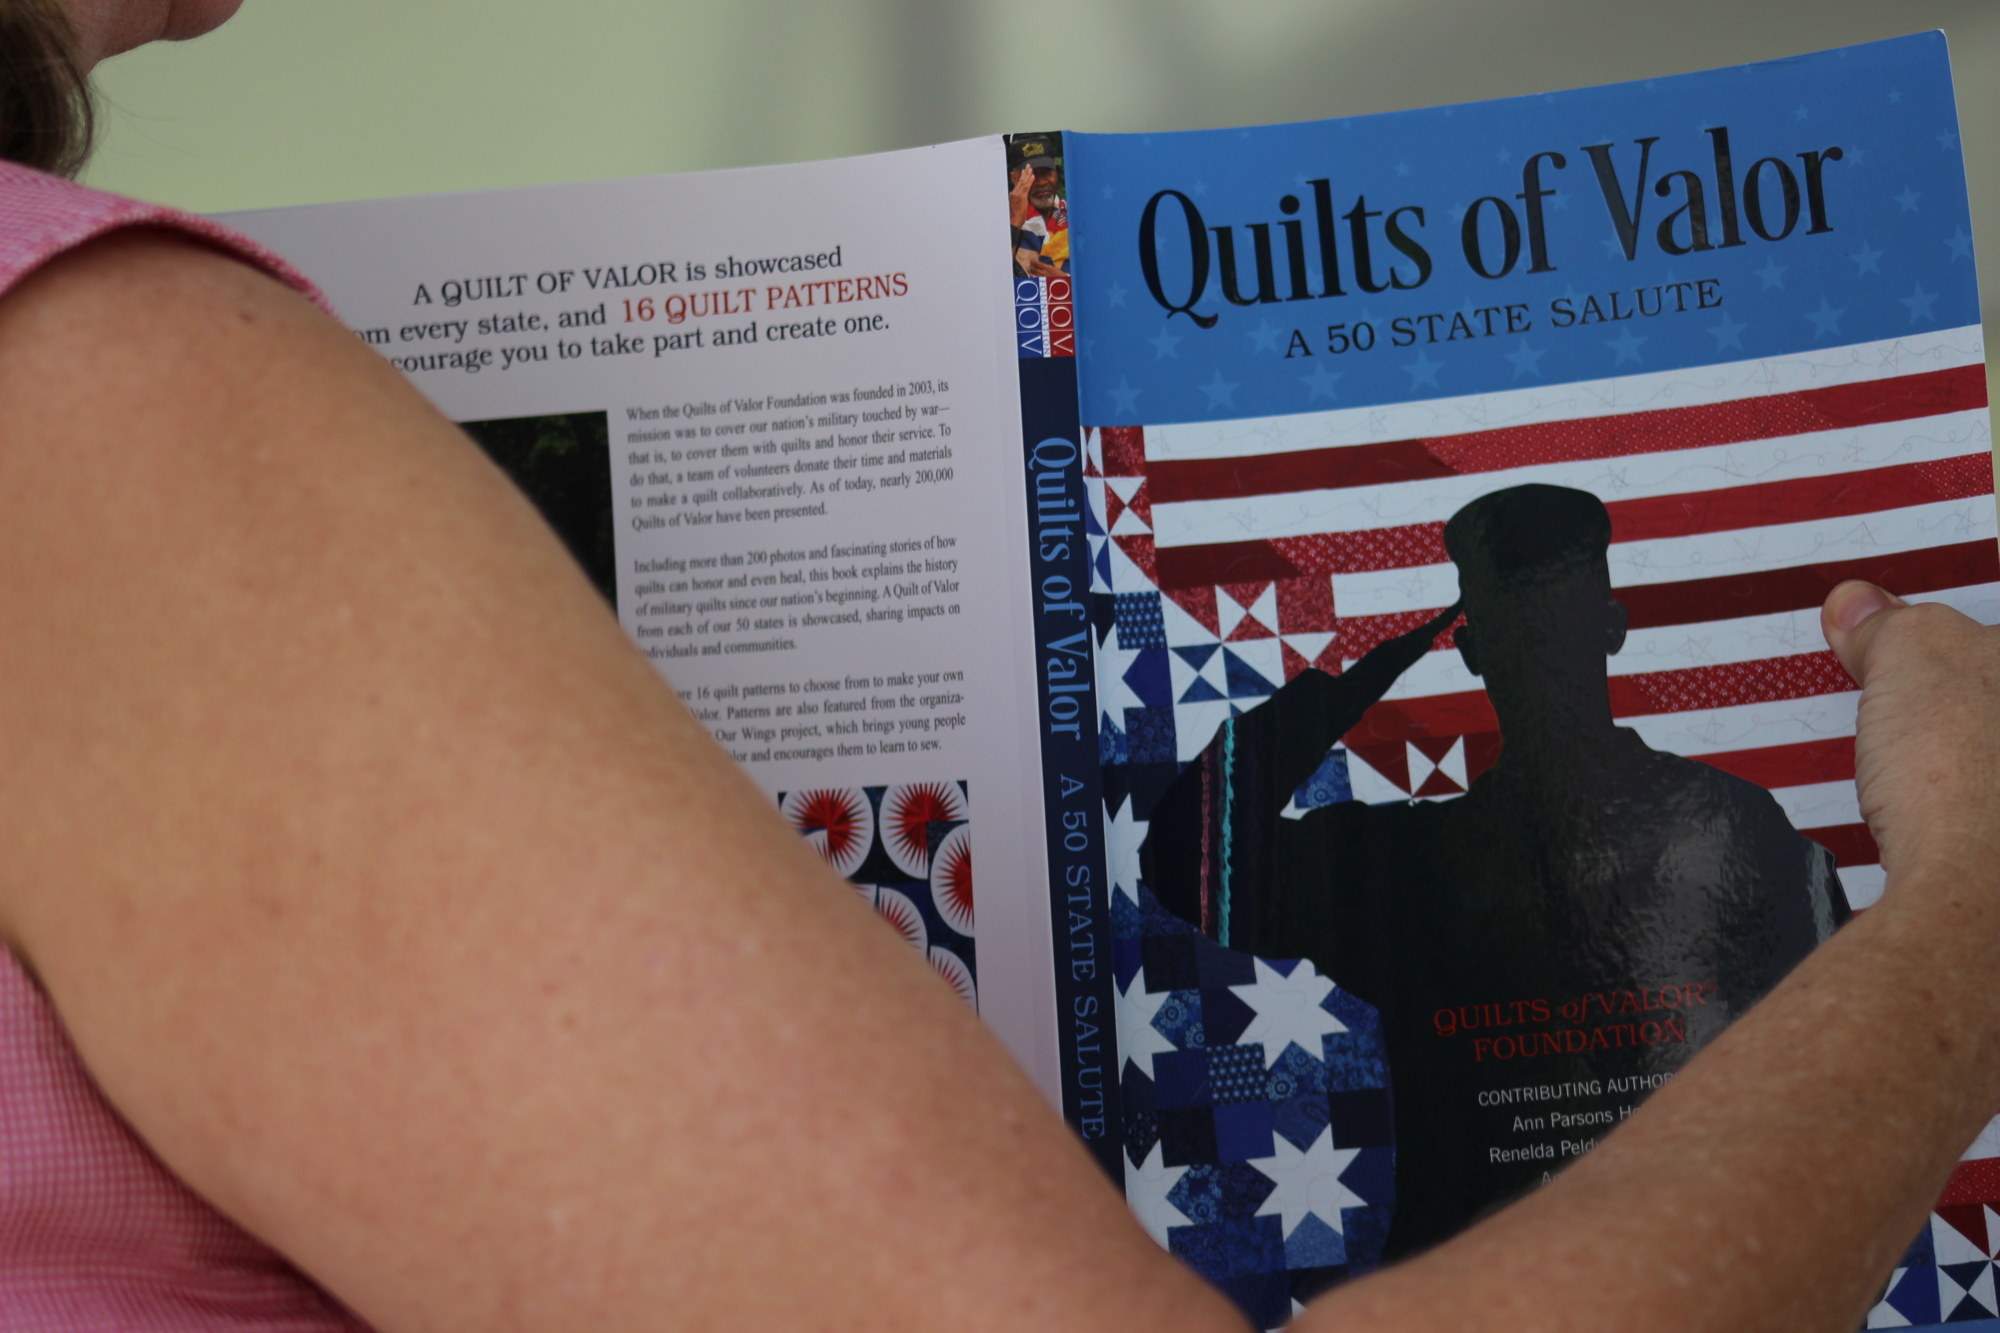 A copy of Quilts of Valor, a 50 State Salute book is held up at the first-annual QOV Golf Tournament on Saturday, March 30. Photo by Alyssa Warner